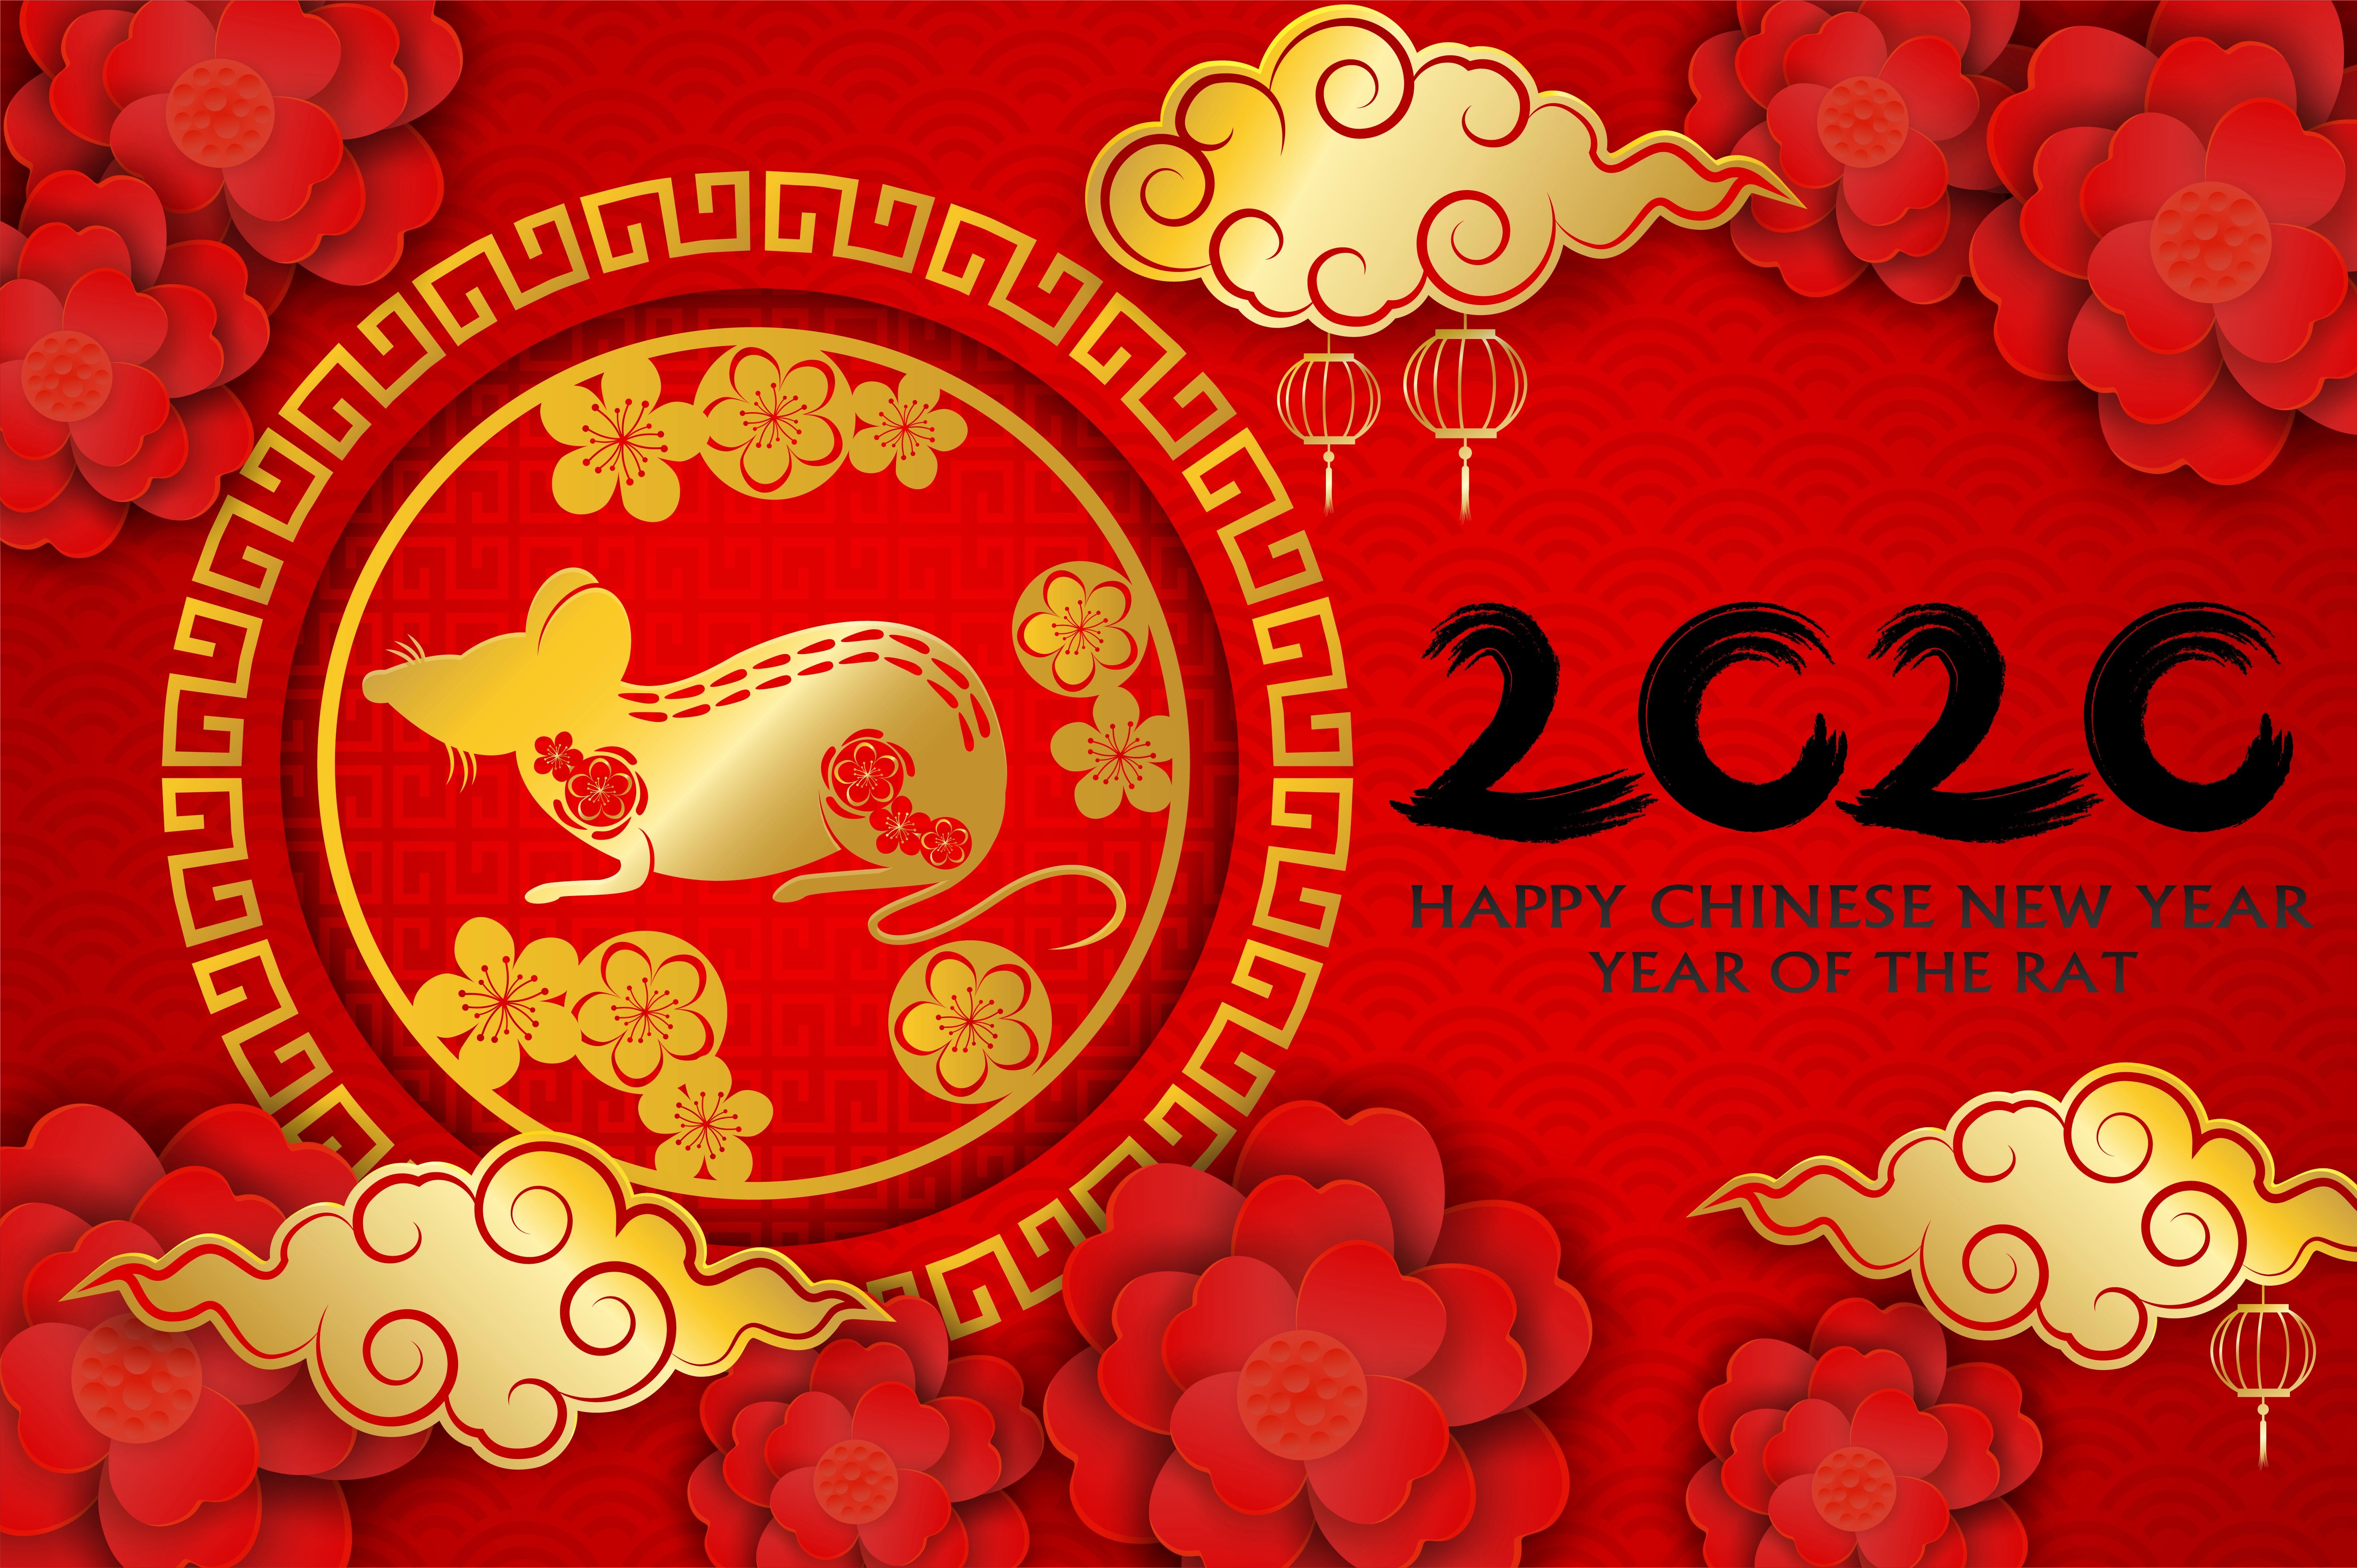 HD wallpaper holiday, chinese new year, happy new year, rat